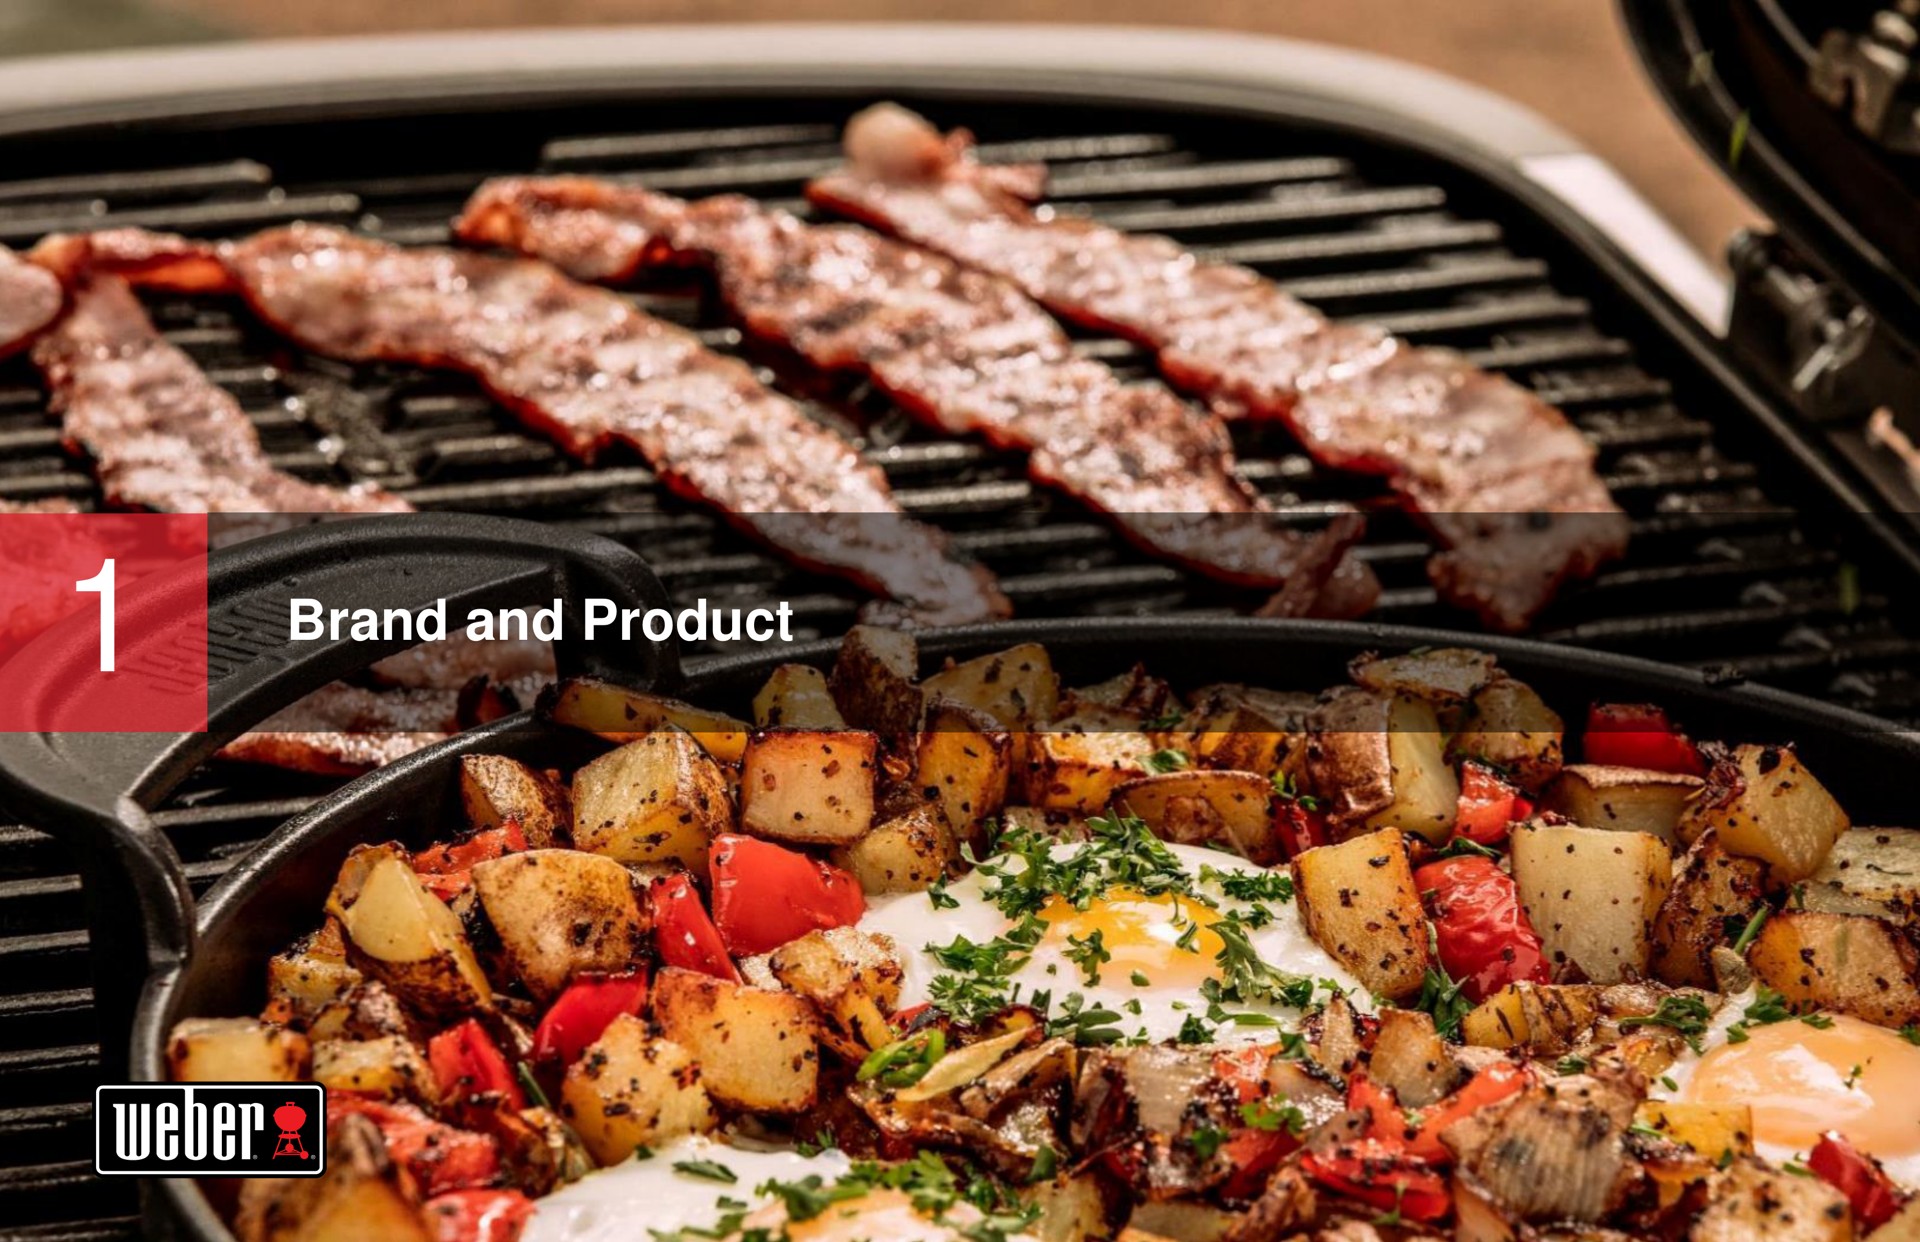 brand and product | Weber